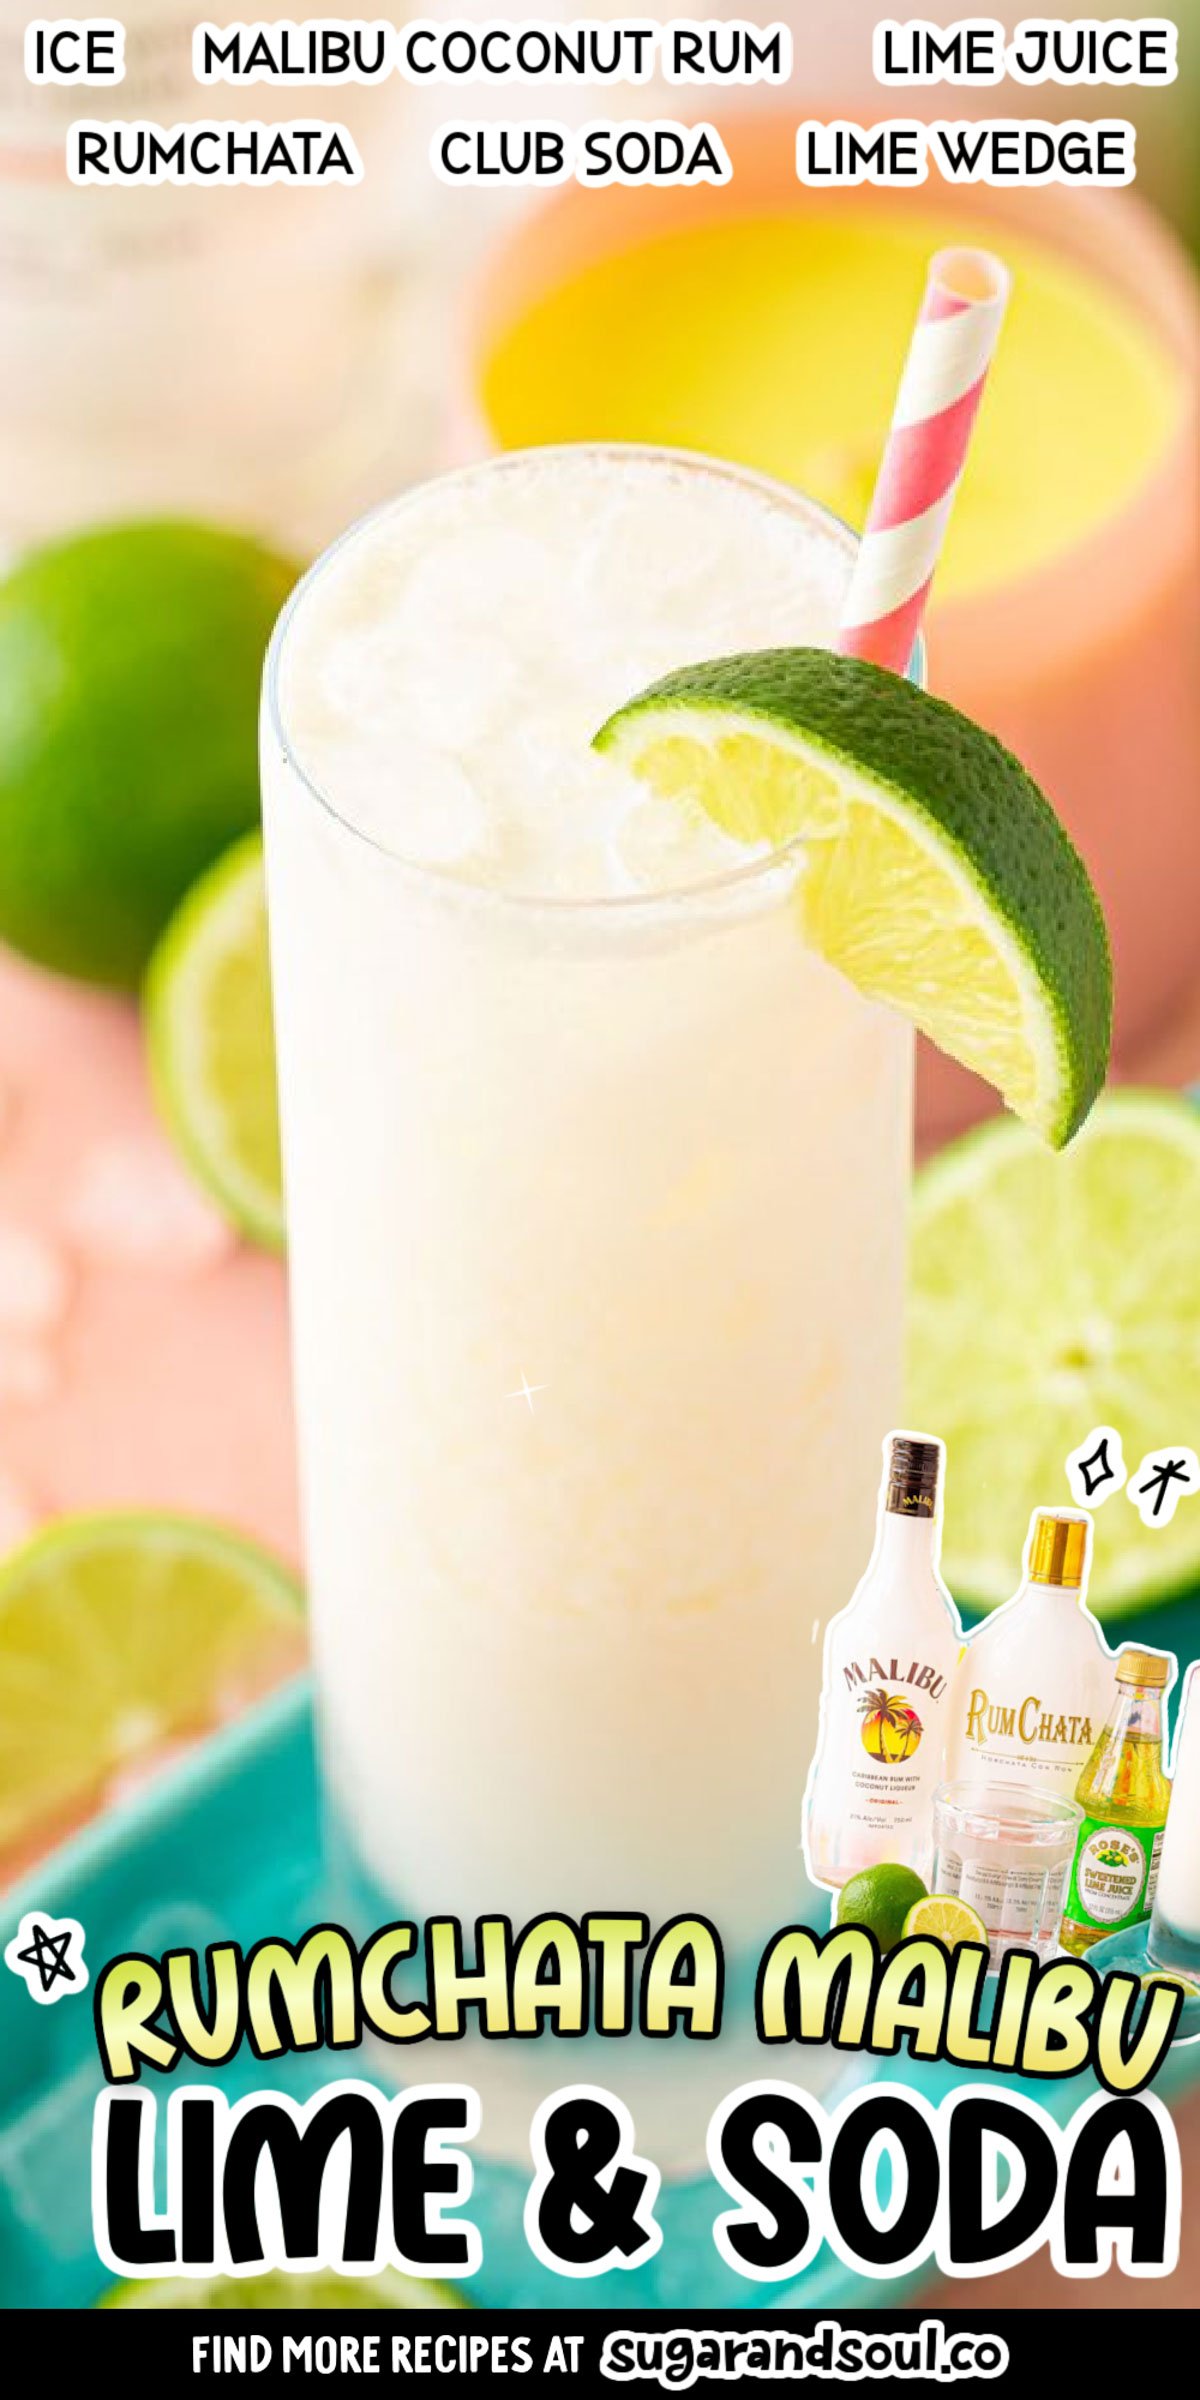 This RumChata Malibu Lime and Soda Cocktail is a simple 4-ingredient drink that's insanely tasty and perfect for summer! With a blend of coconut and lime that's both sweet and refreshing and goes down easy! via @sugarandsoulco